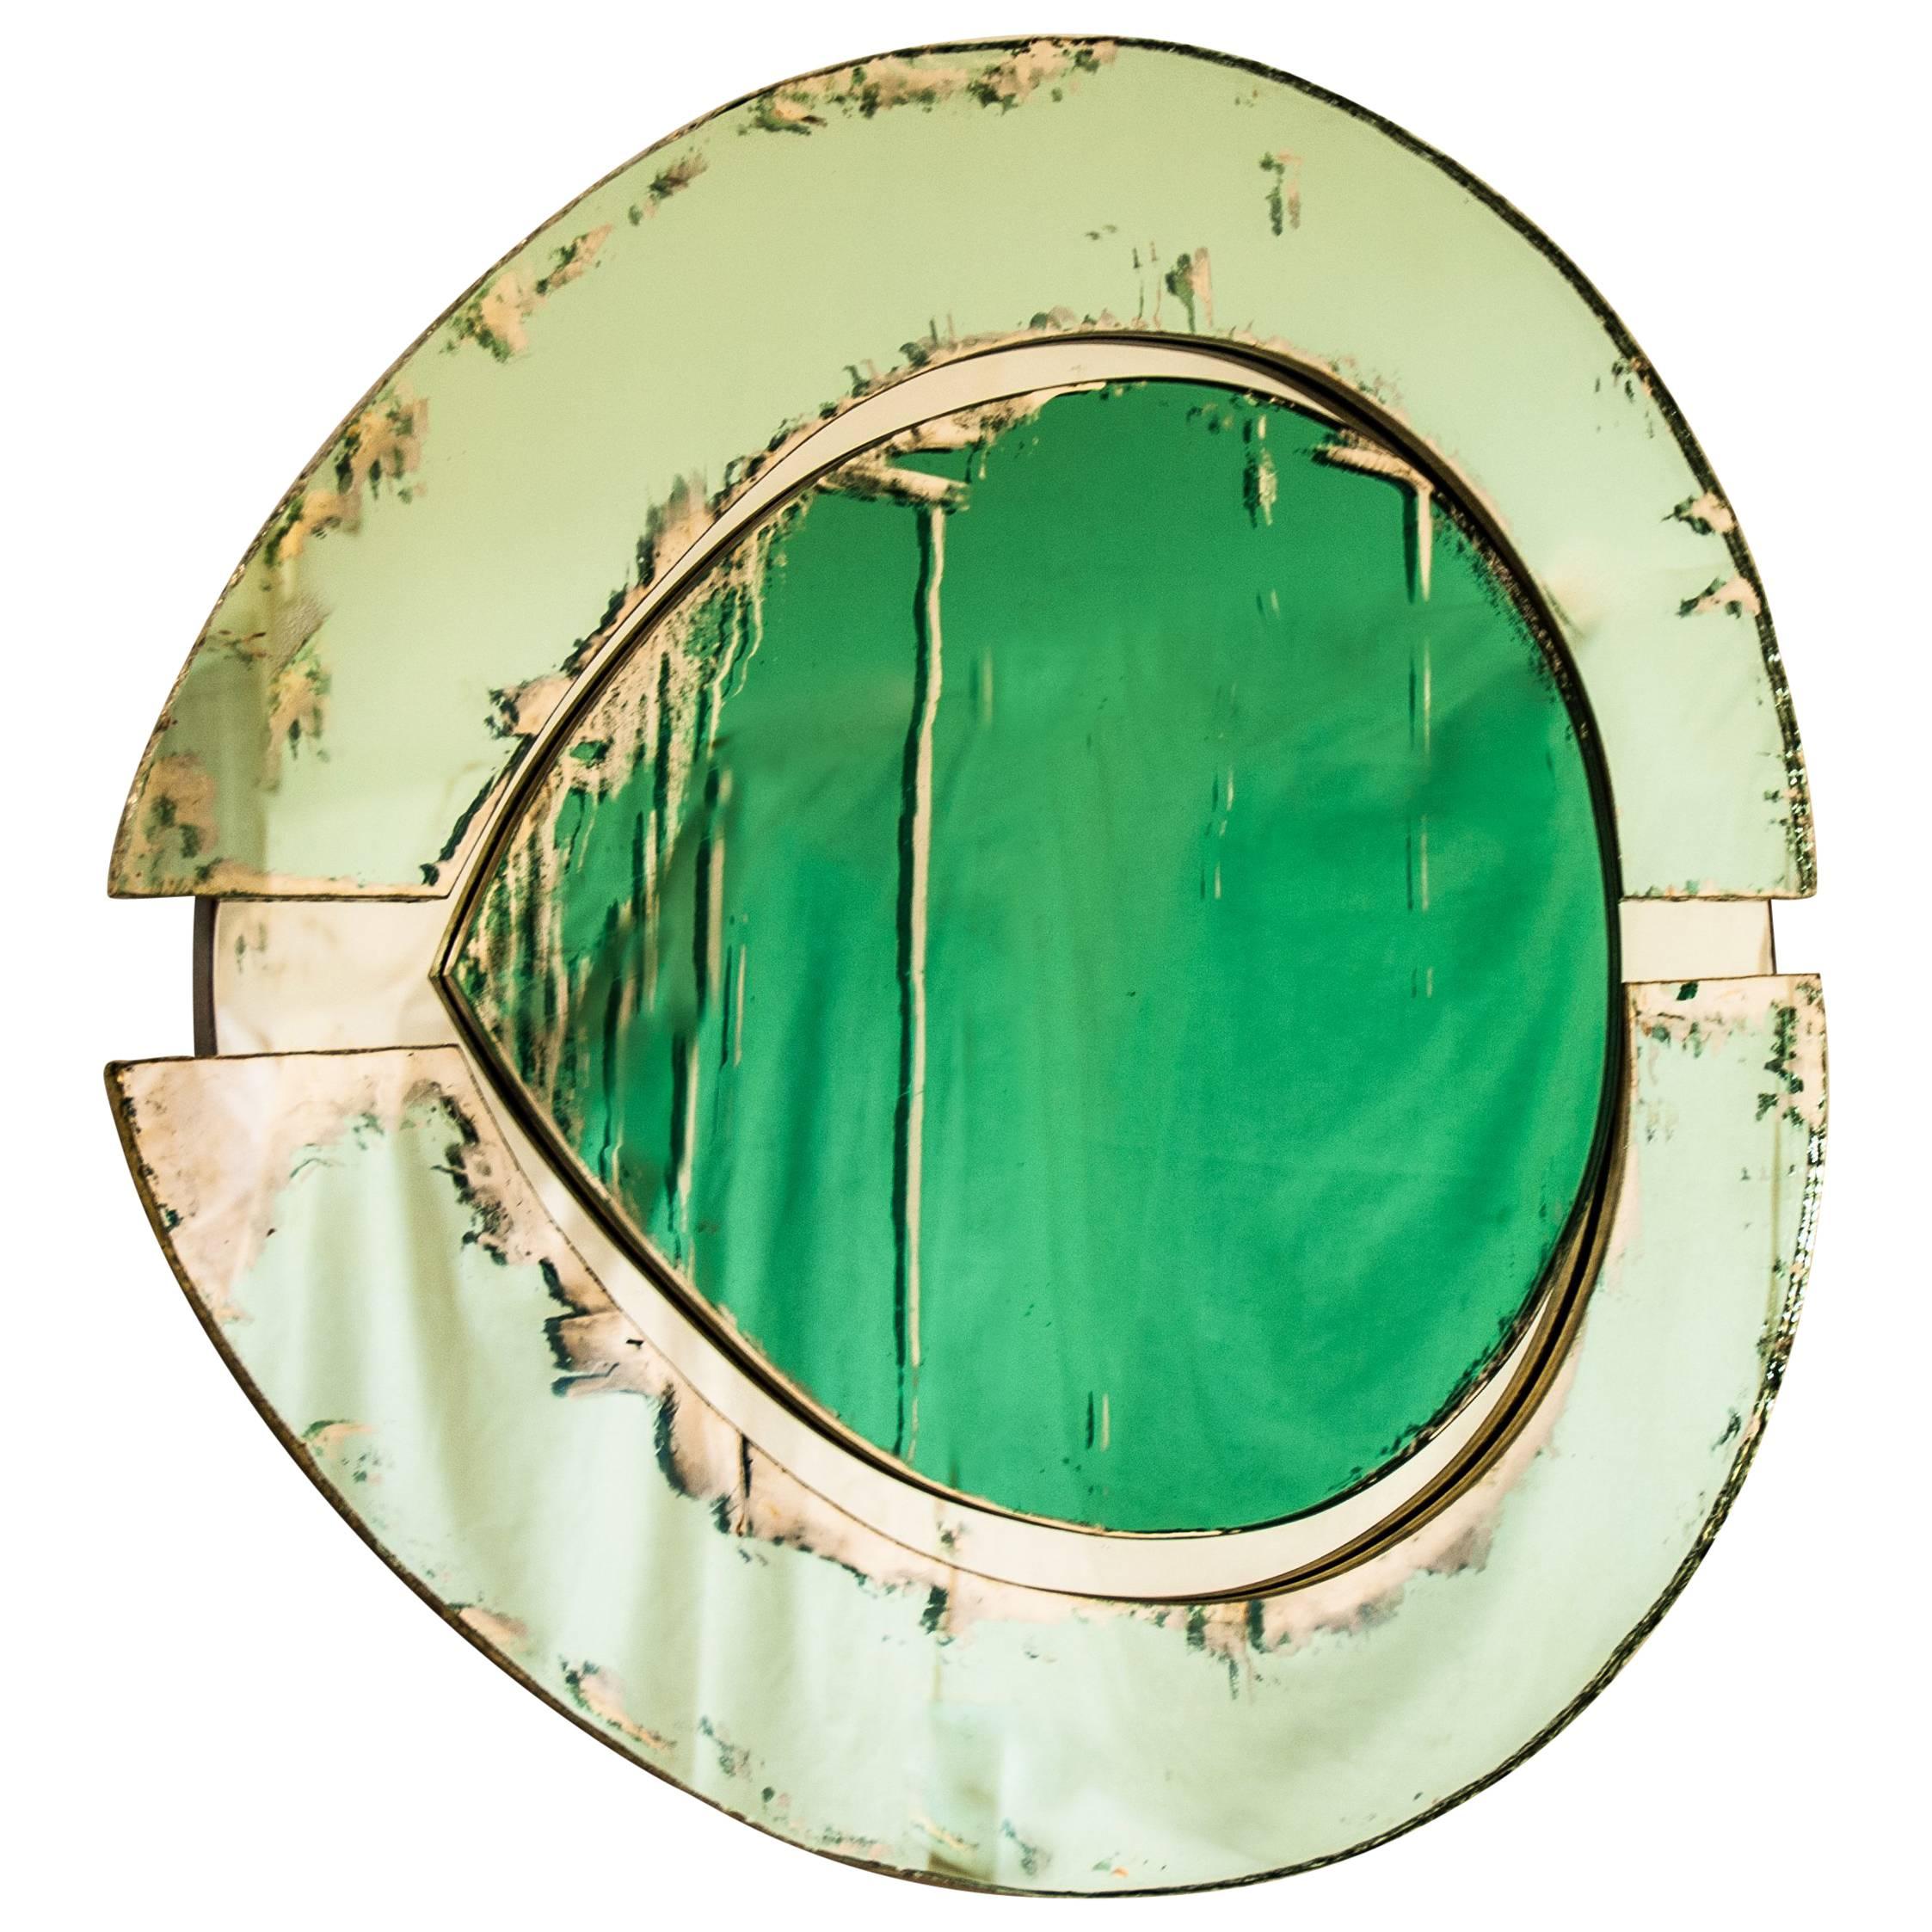 Irys Wall Mirror with Jade Green Mirror Inside and Actual Mirror Outside